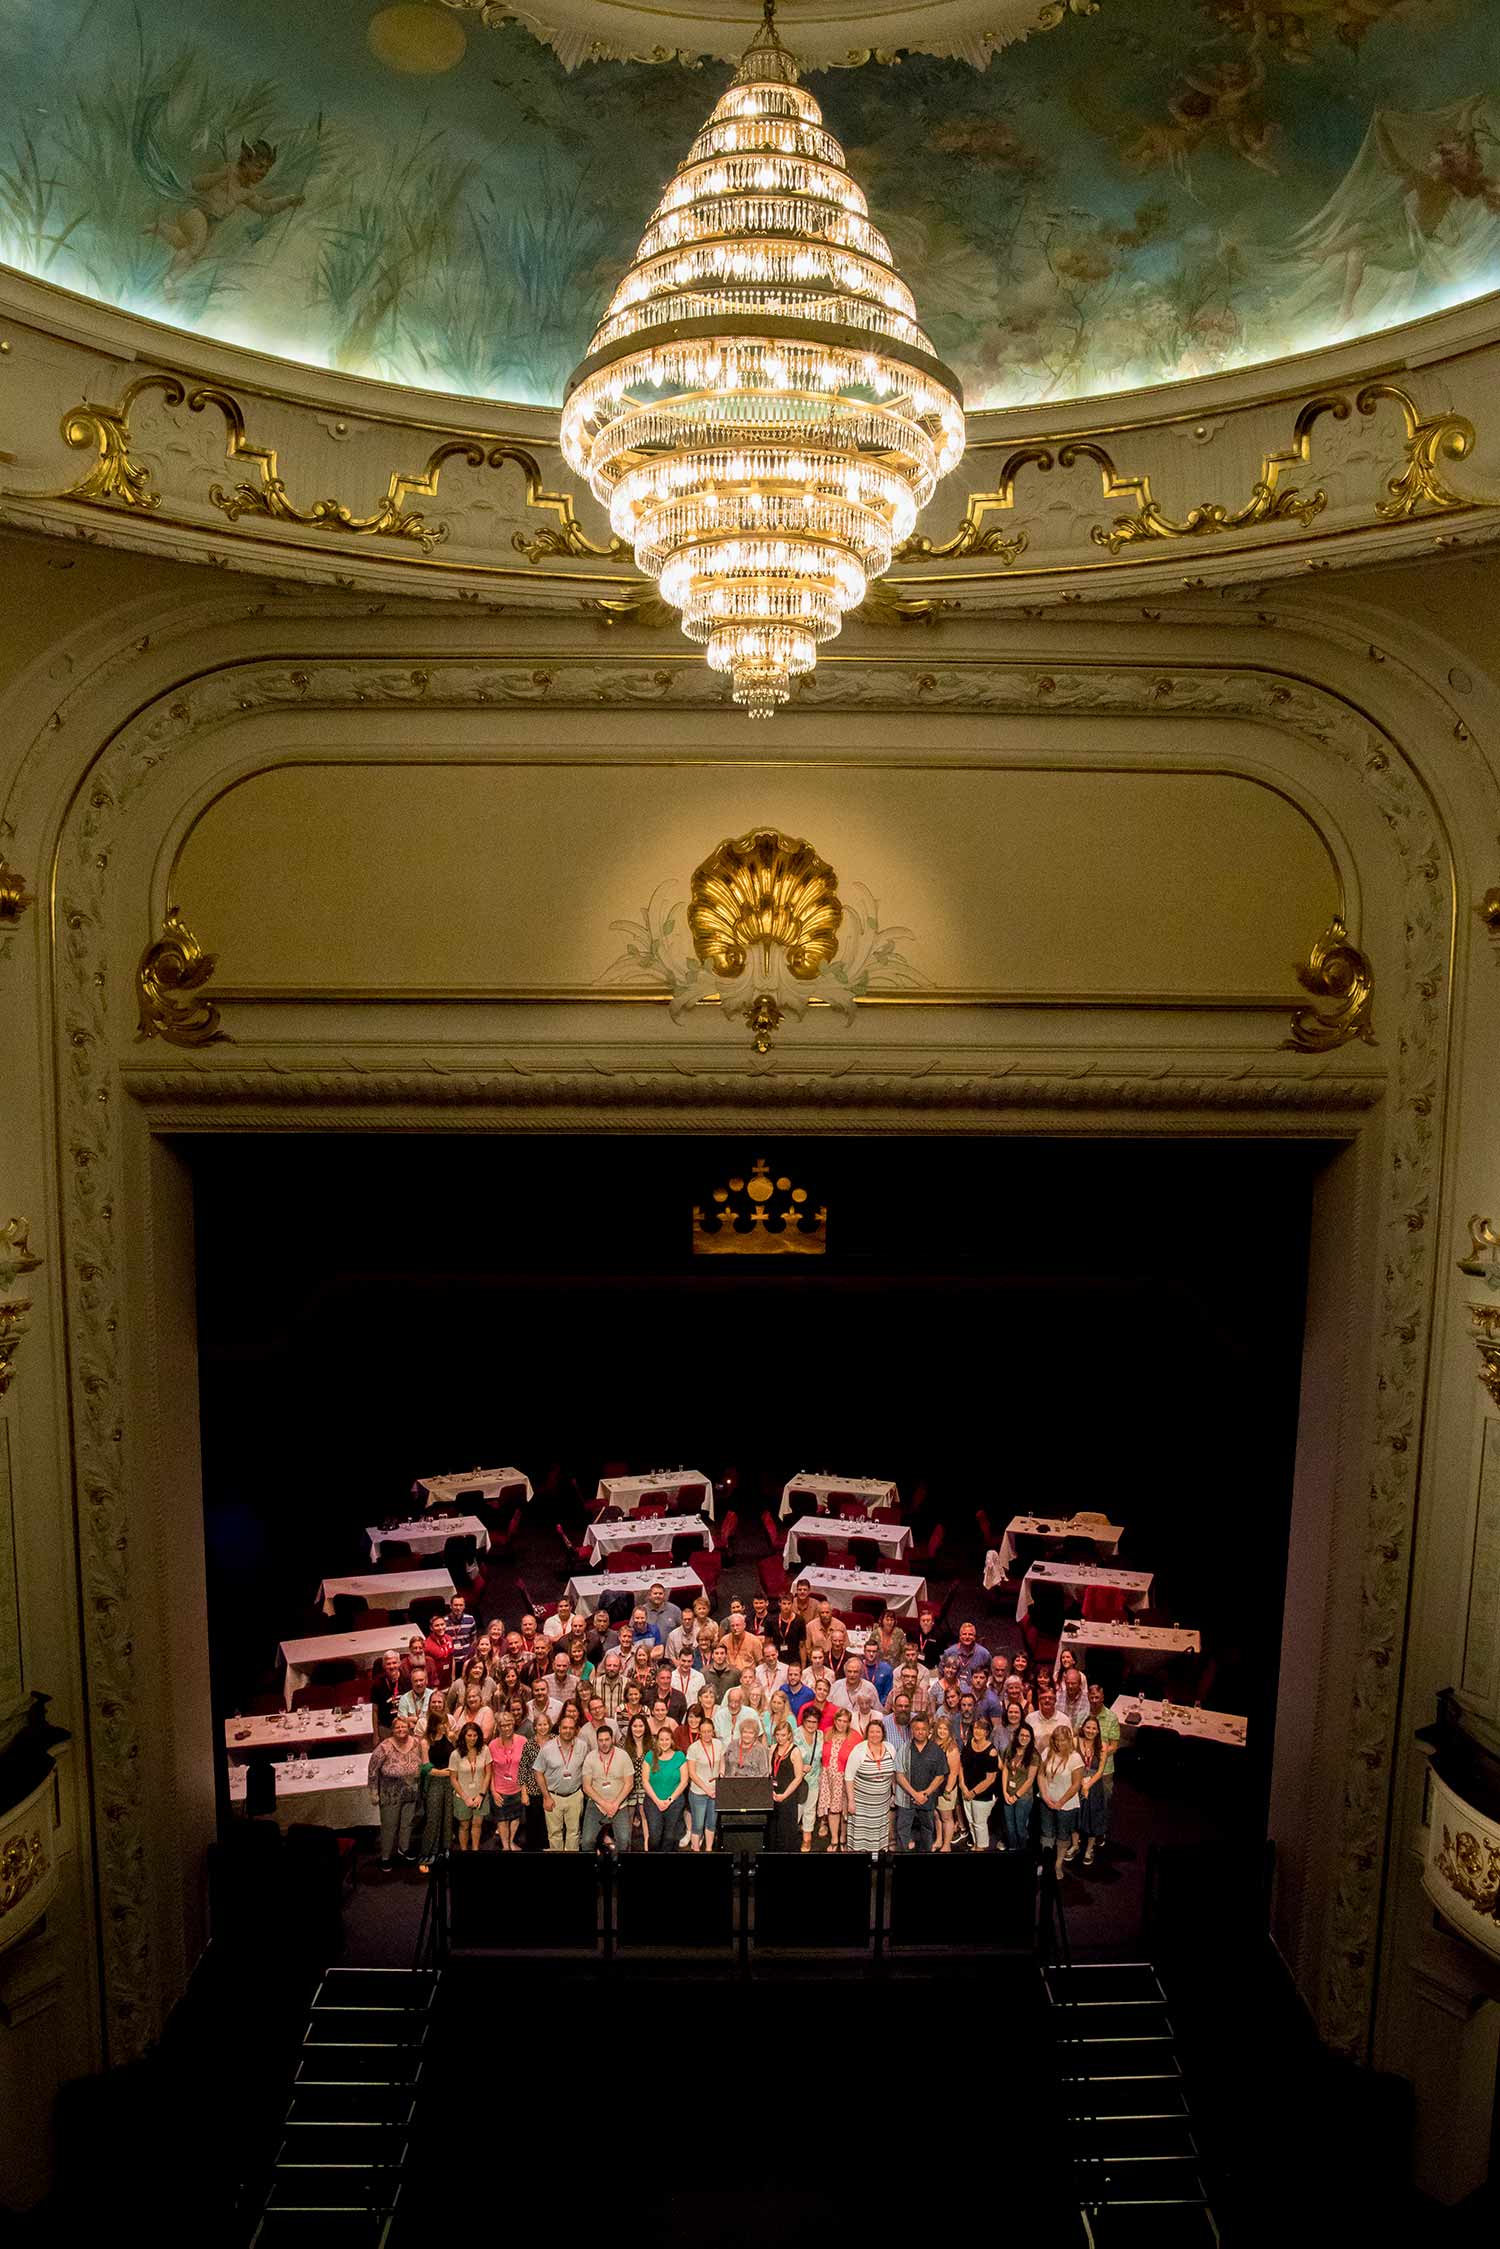 The first group of attendees get the royal treatment kicking off the 2018 International Fruit Tree Association New Zealand Study Tour onstage the Isaac Theatre Royal in Christchurch in February. For many in attendance, the tour is their first time in New Zealand. <b>(TJ Mullinax/Good Fruit Grower)</b>